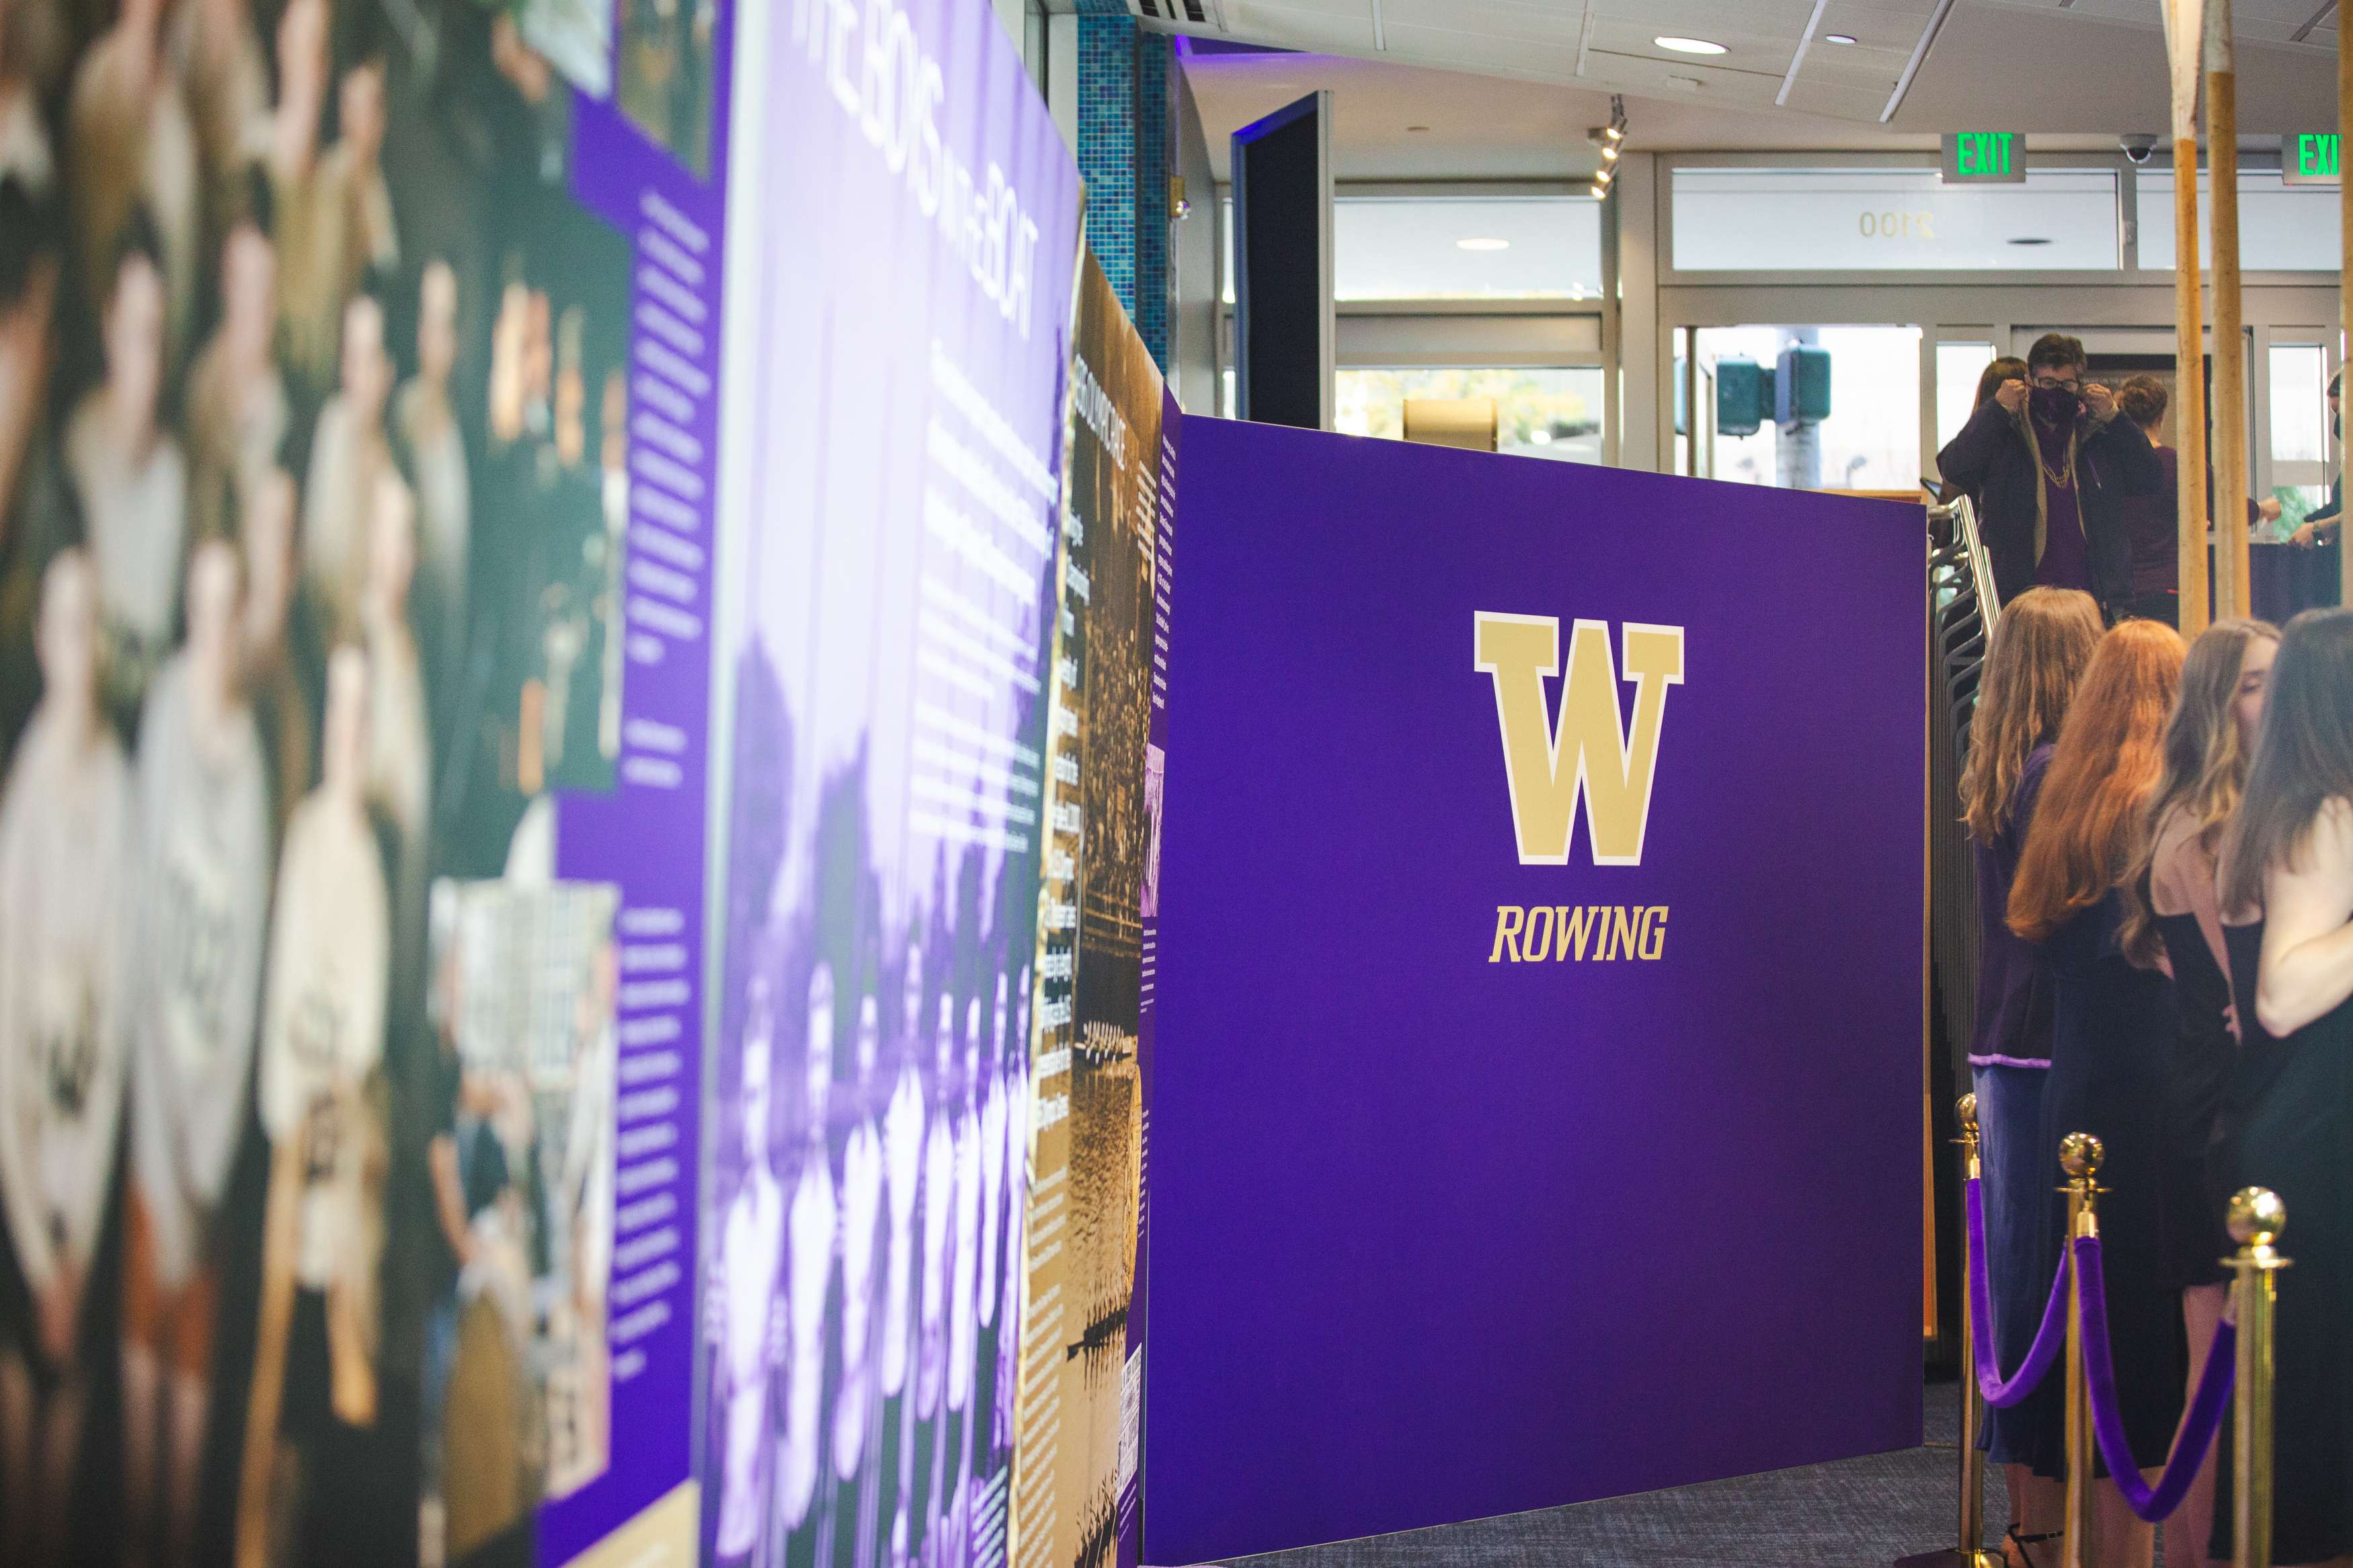 A purple sign that says "W Rowing" with a queue line next to it.